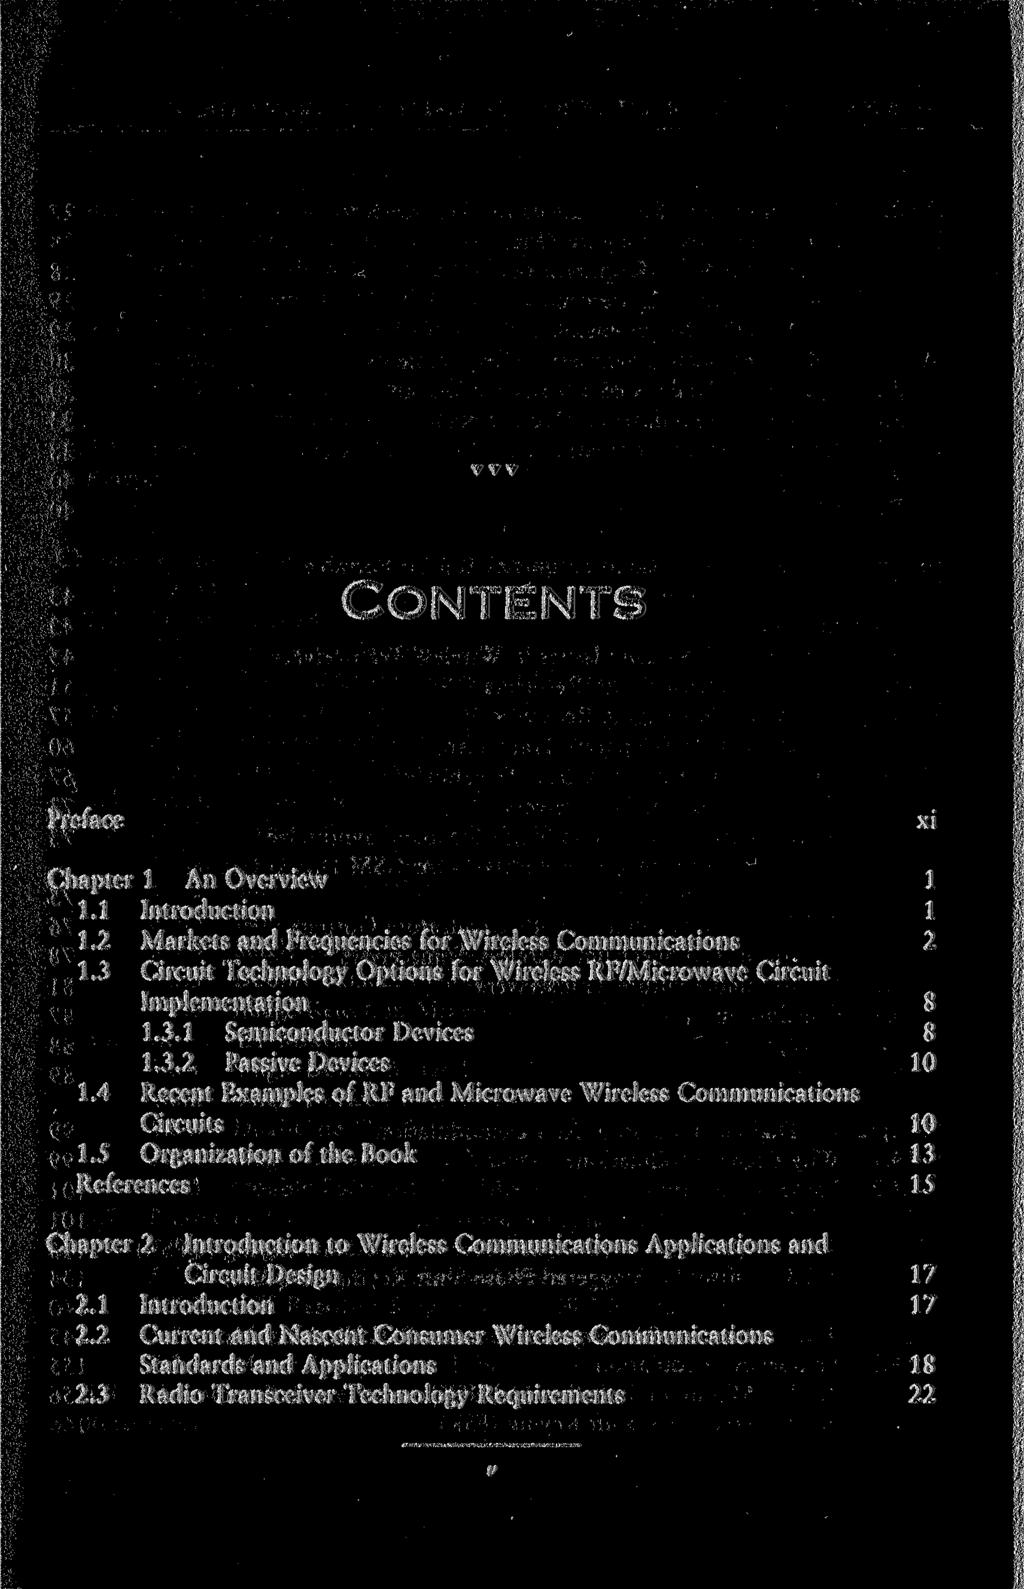 CONTENTS Preface xi Chapter 1 An Overview 1 1.1 Introduction 1 1.2 Markets and Frequencies for Wireless Communications 2 1.